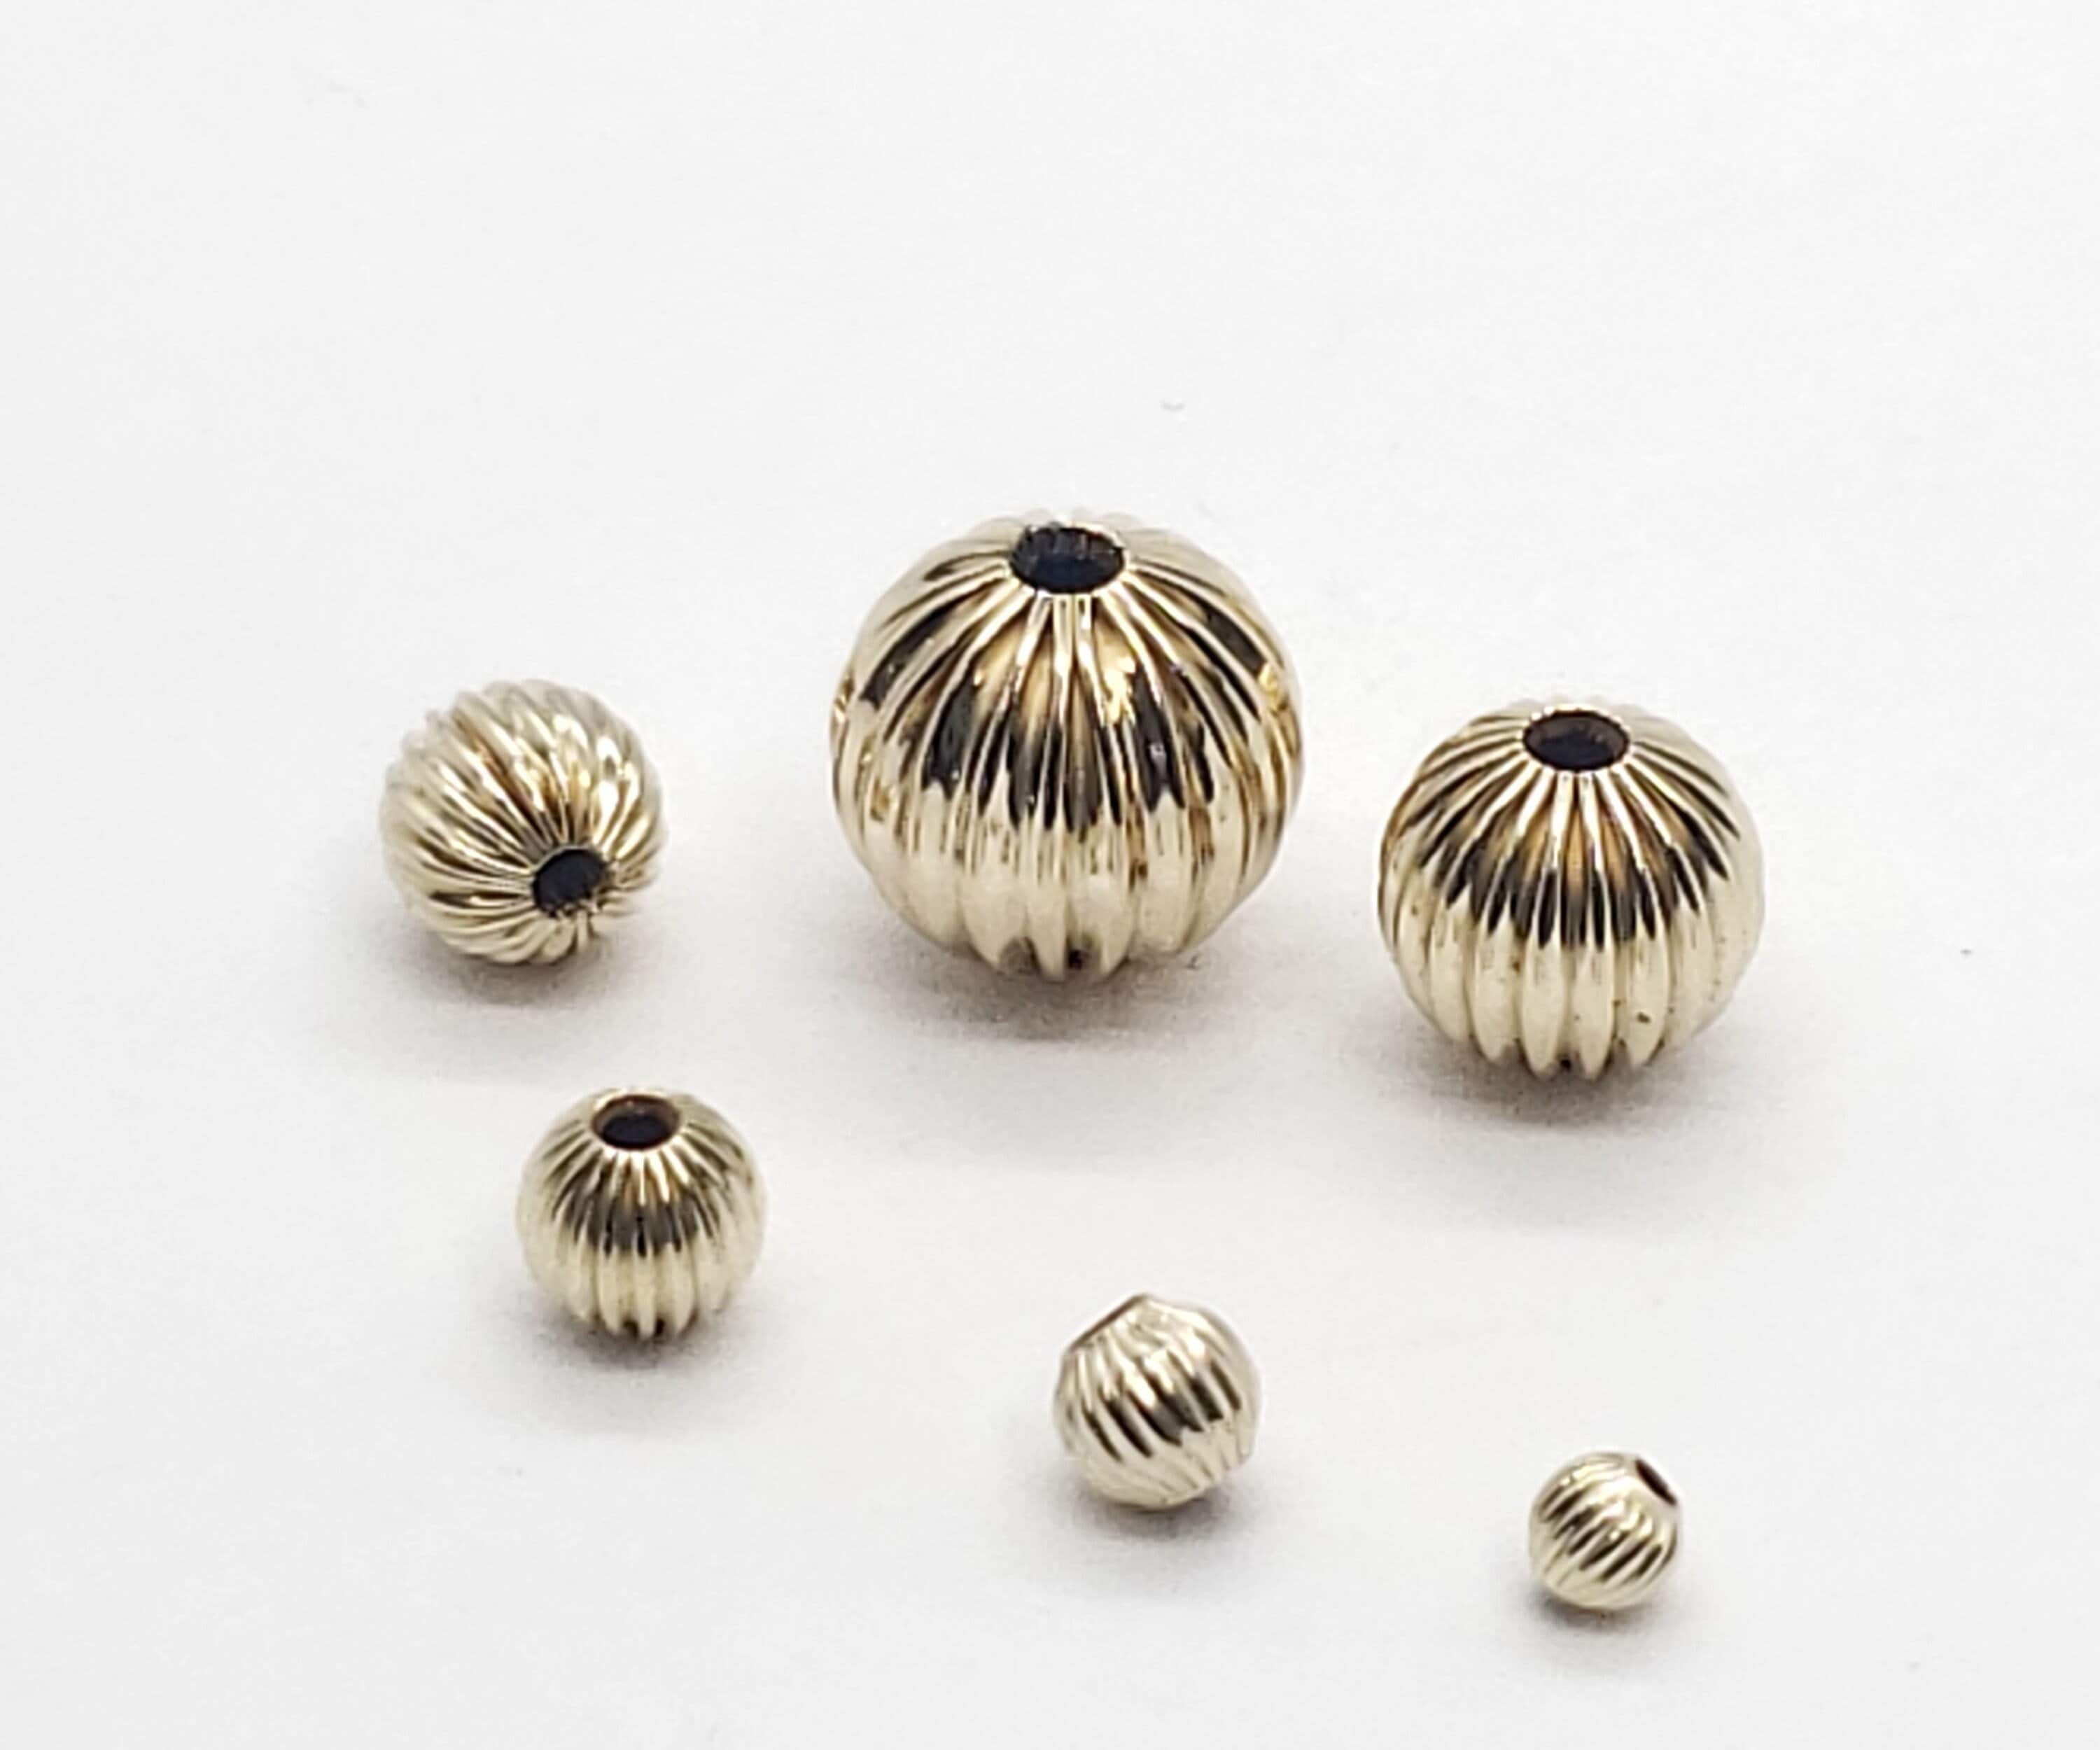 Gold Filled 14K Corrugated Round Beads for Jewelry Making 4mm, 6mm Gold  Beads to Make Jewelry With, Bulk Metal Beads, Wholesale Beads 